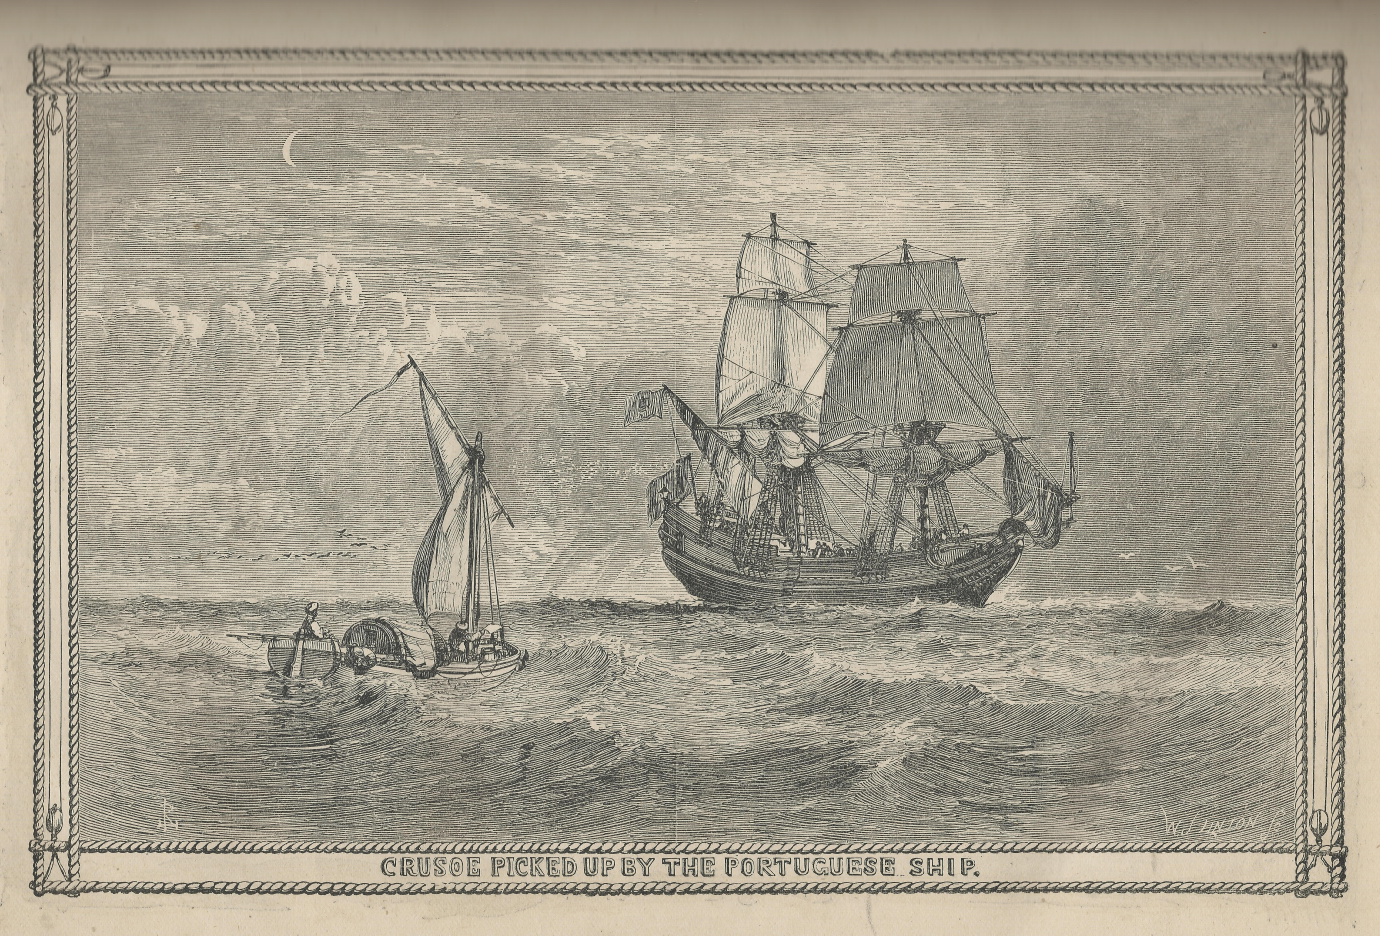 The Novel Before the Nation-State:&nbsp;Robinson Crusoe&nbsp;and Early Global Fiction&nbsp;